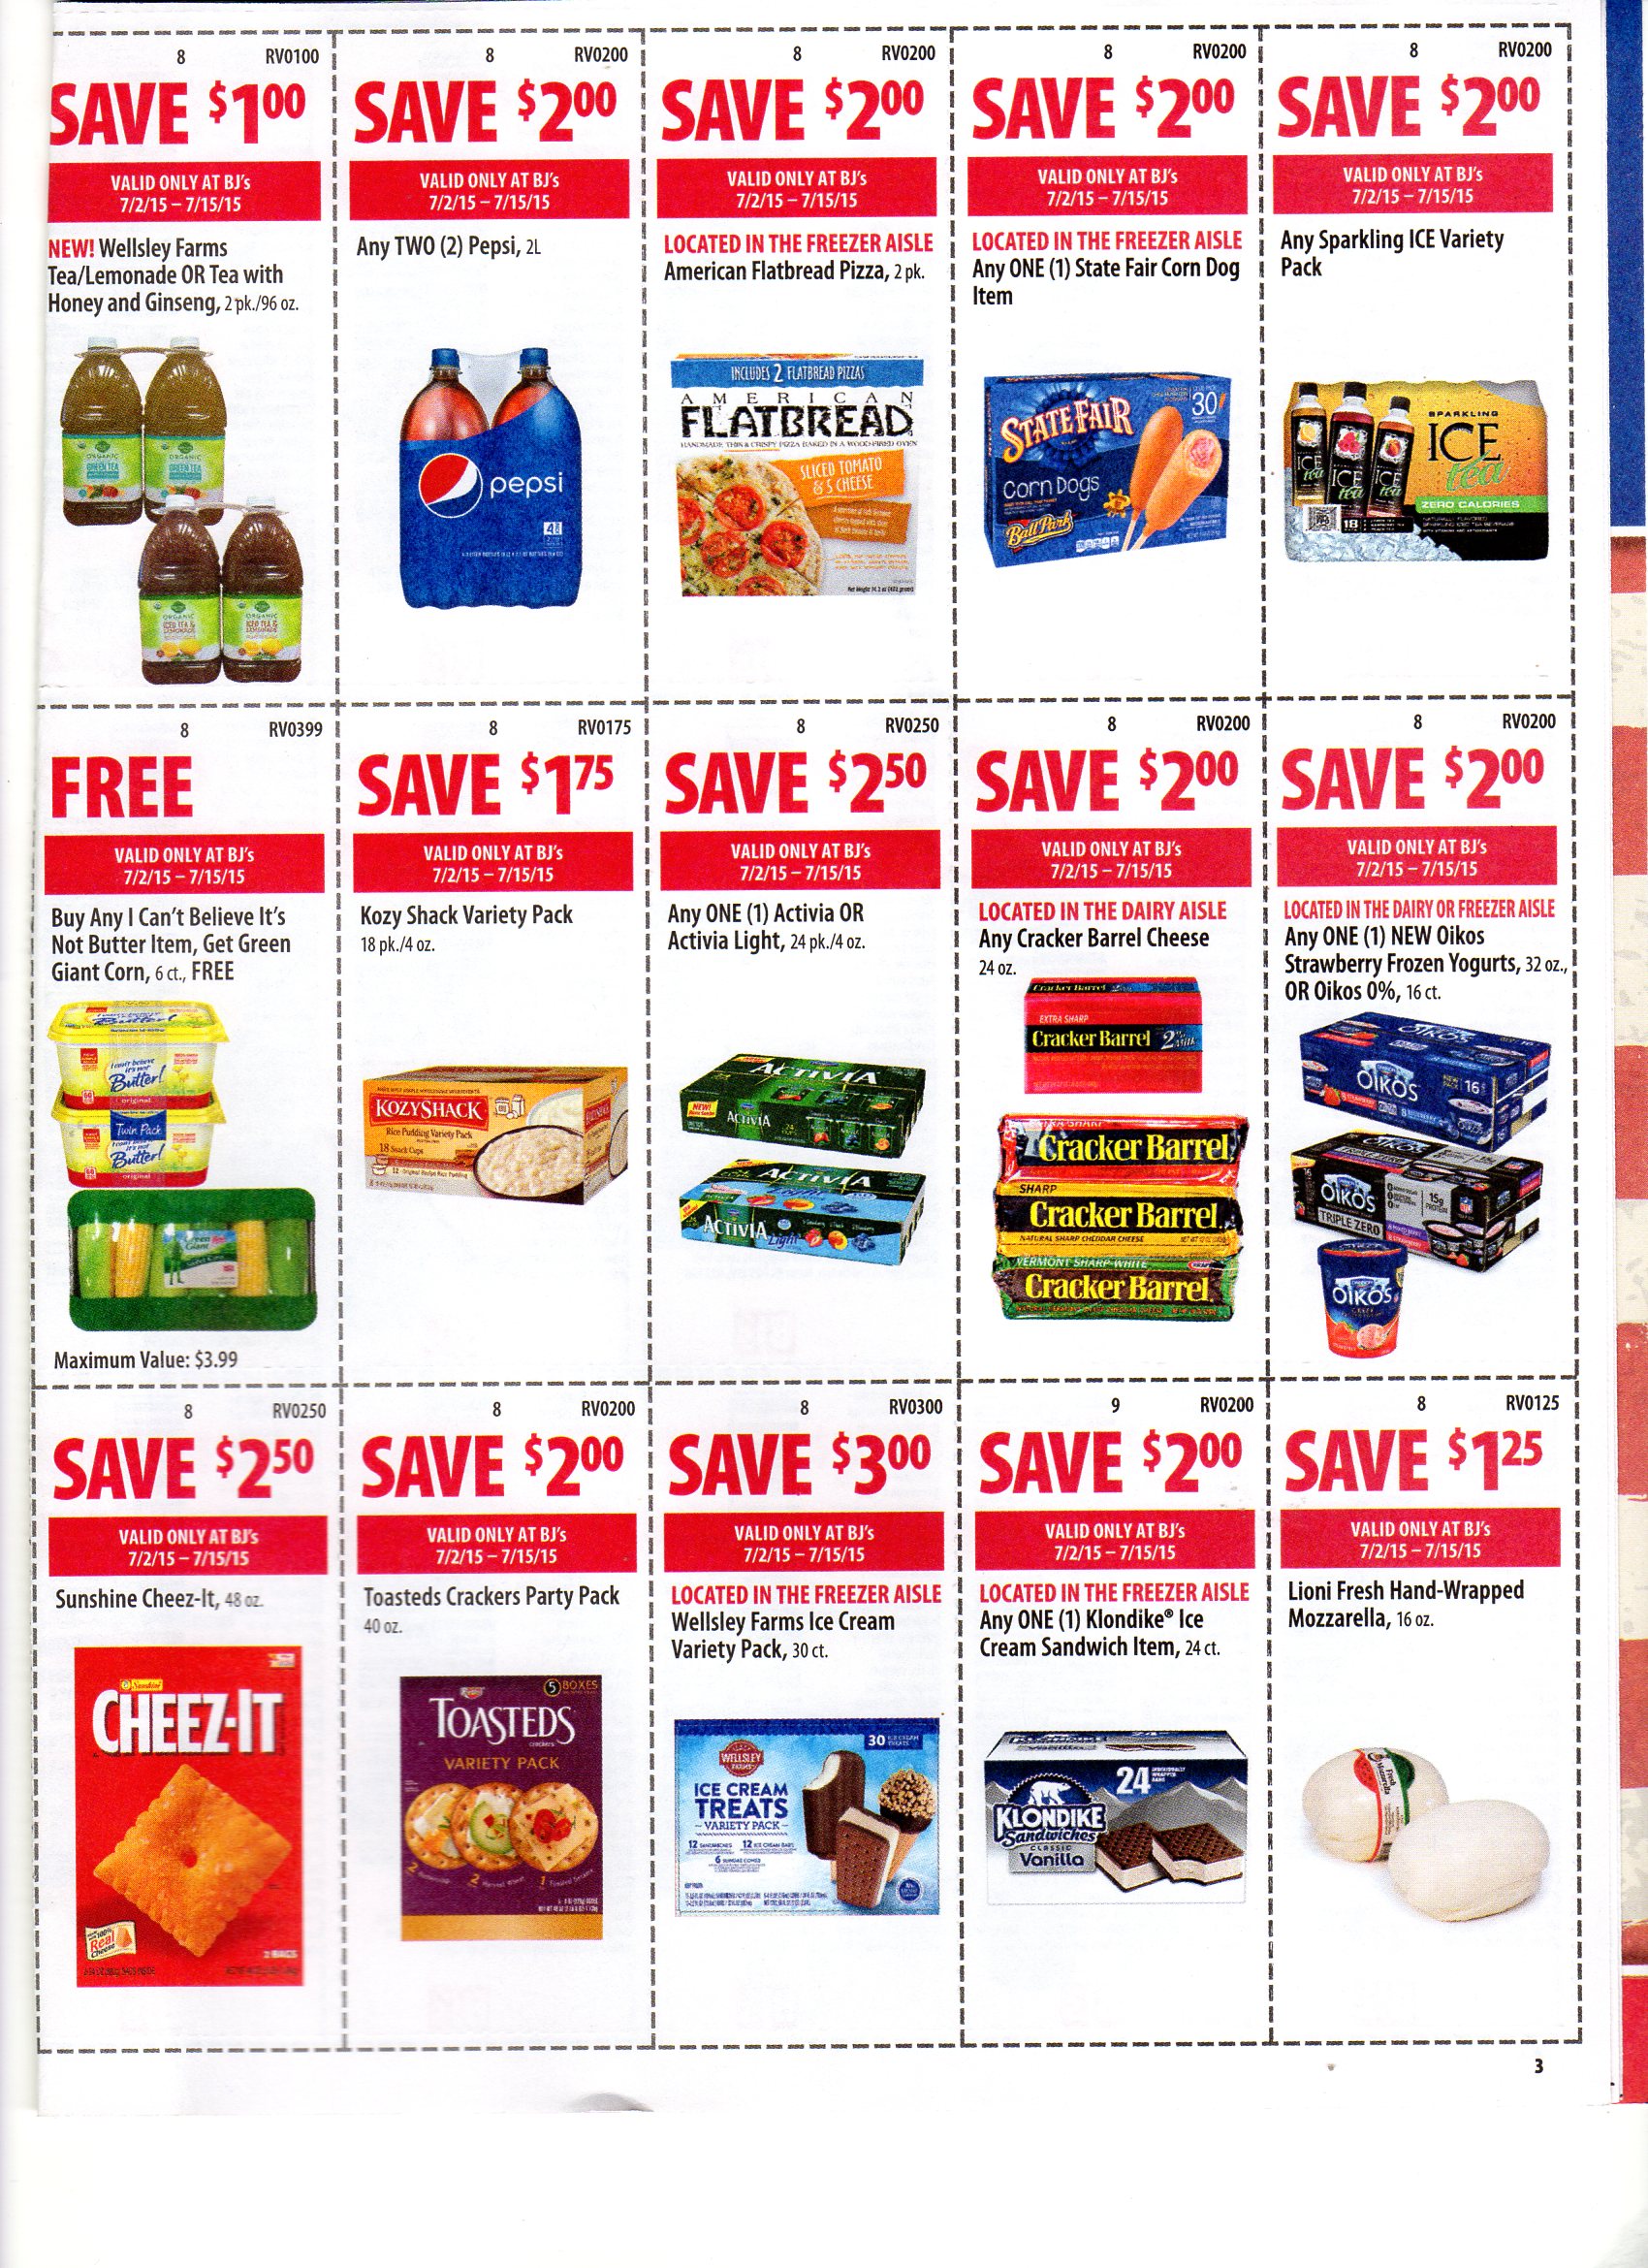 BJ's Front of Store Coupons for 7/27/15